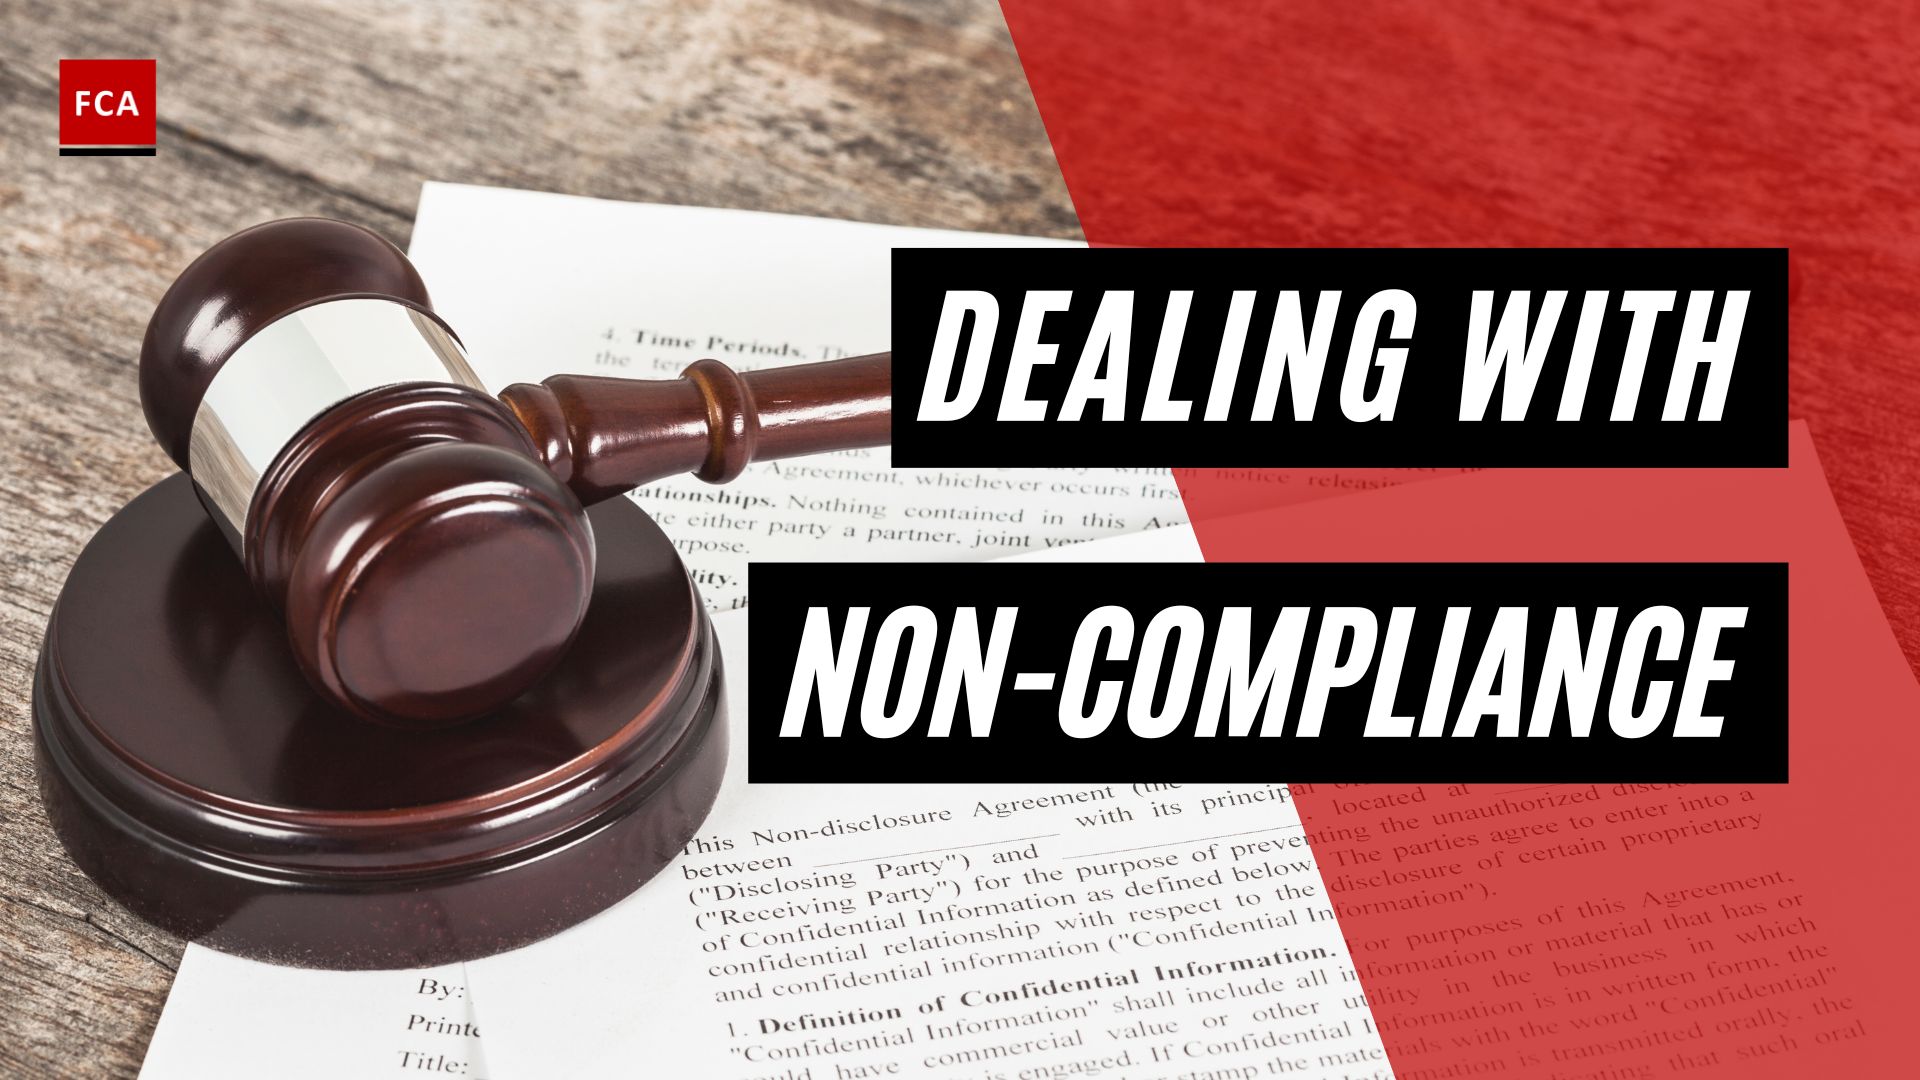 Dealing With Non-Compliance